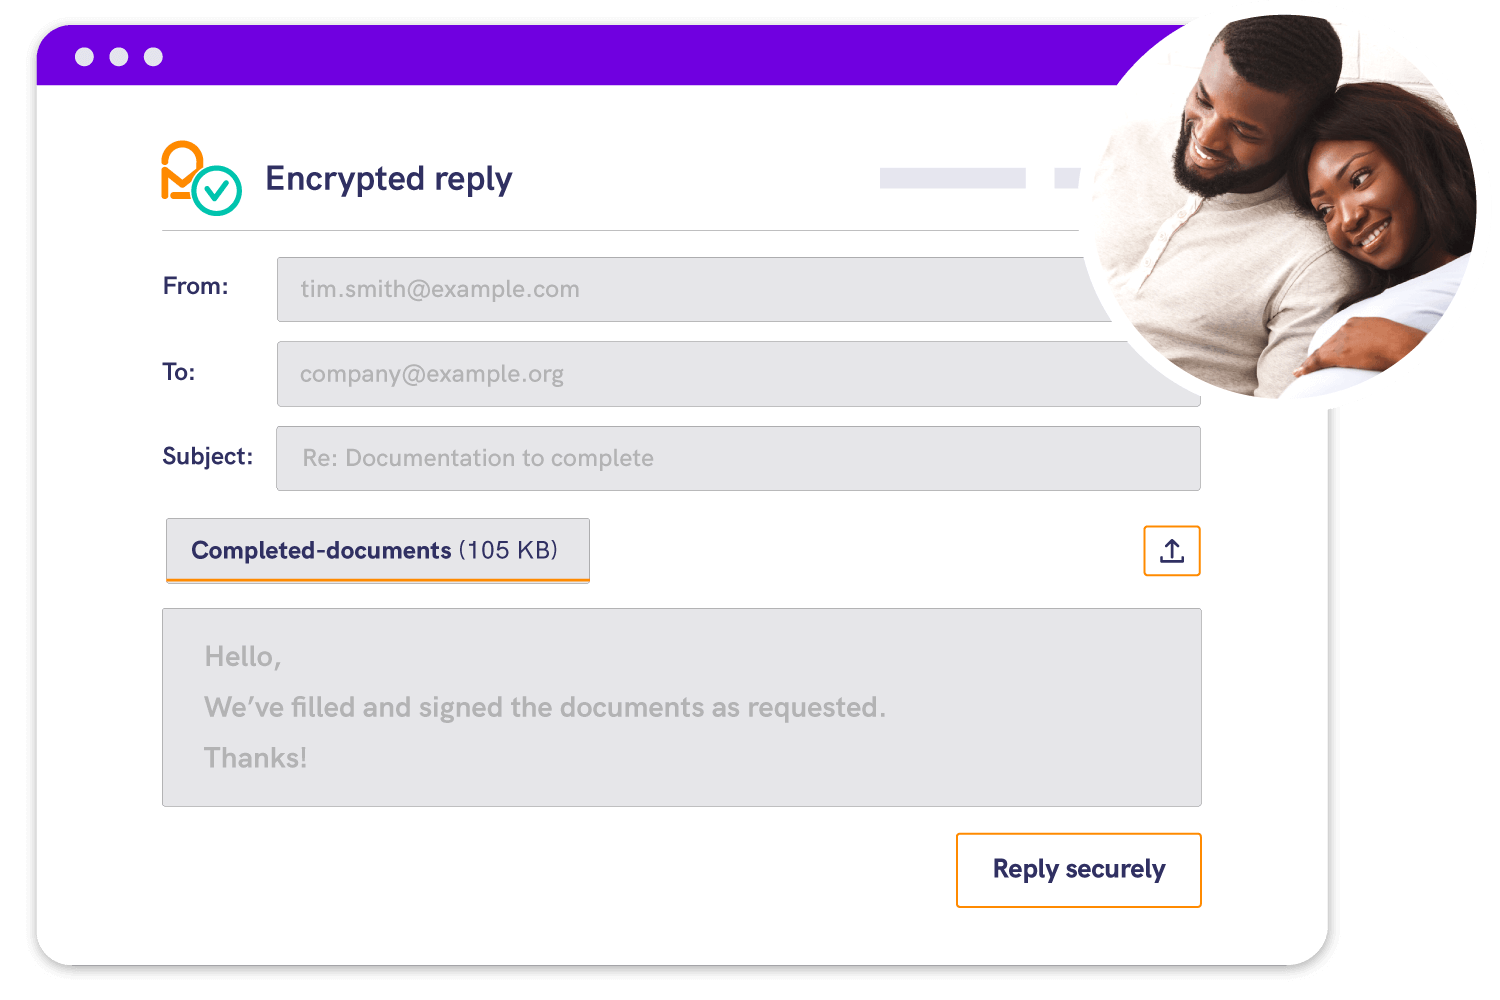 Customers replying to encrypted emails